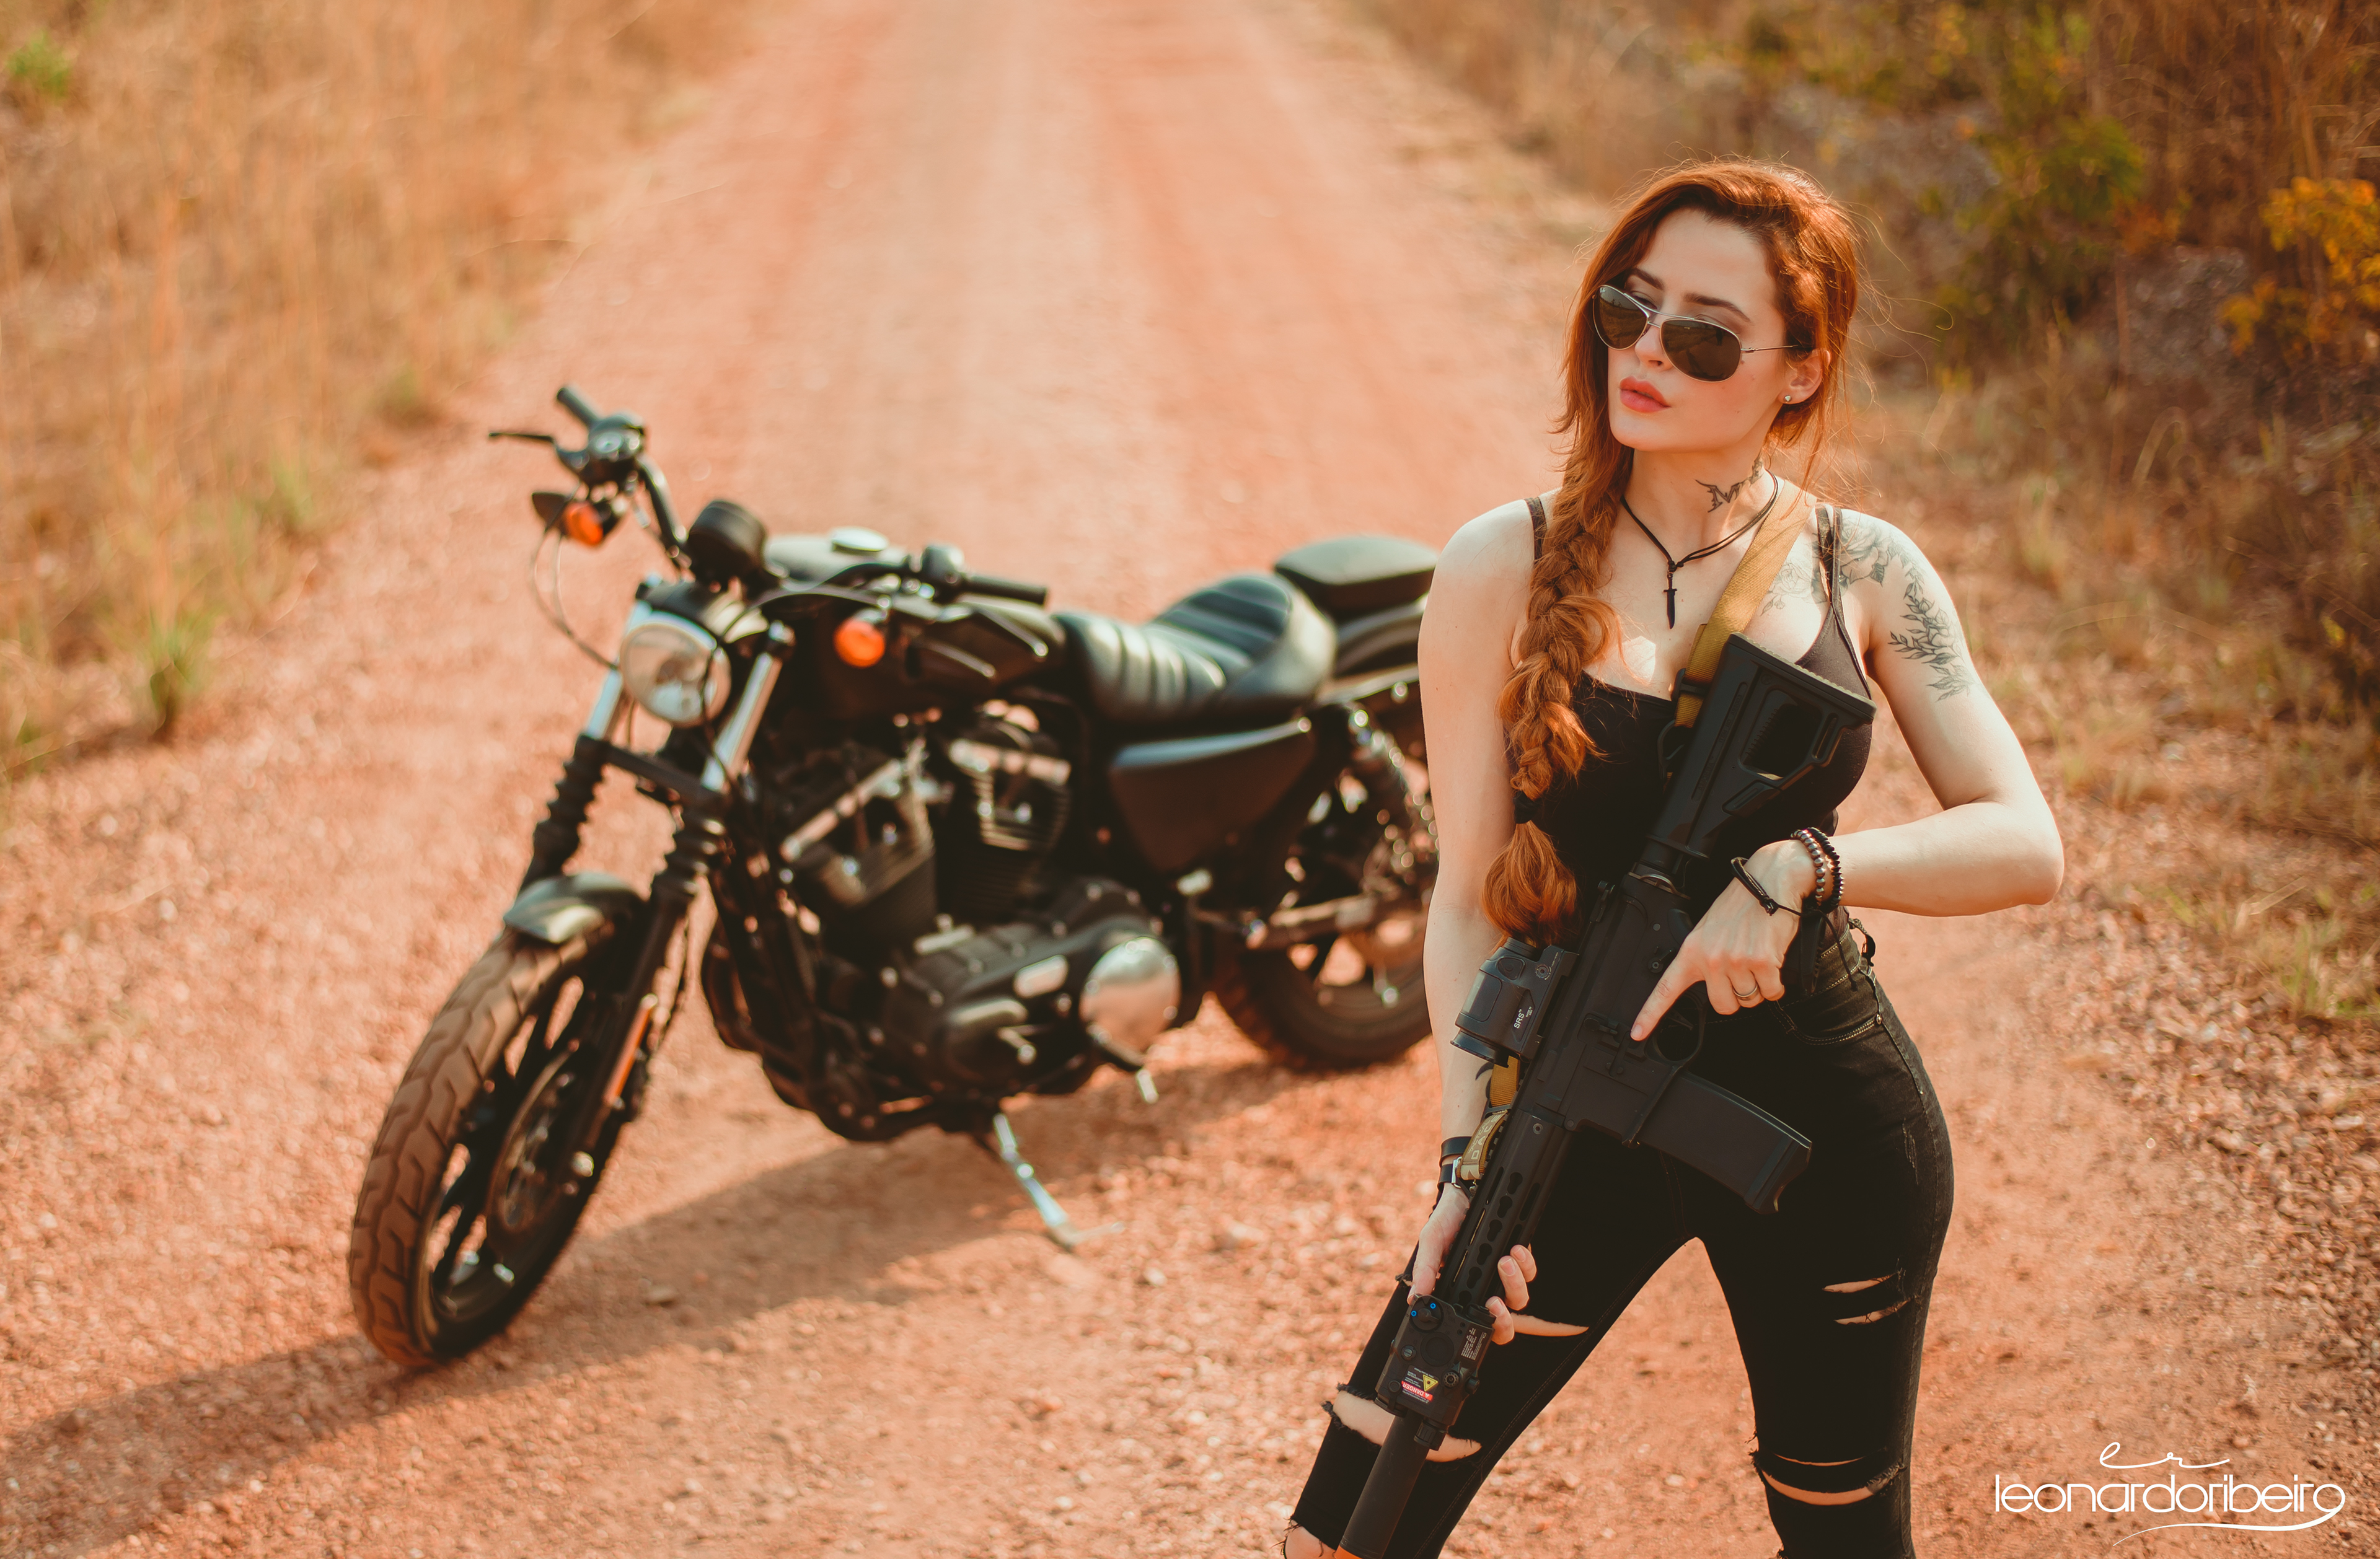 People 3840x2516 Leonardo Ribeiro women model redhead black clothing jeans torn jeans weapon motorcycle women with motorcycles women outdoors Iron 883 Harley-Davidson American motorcycles